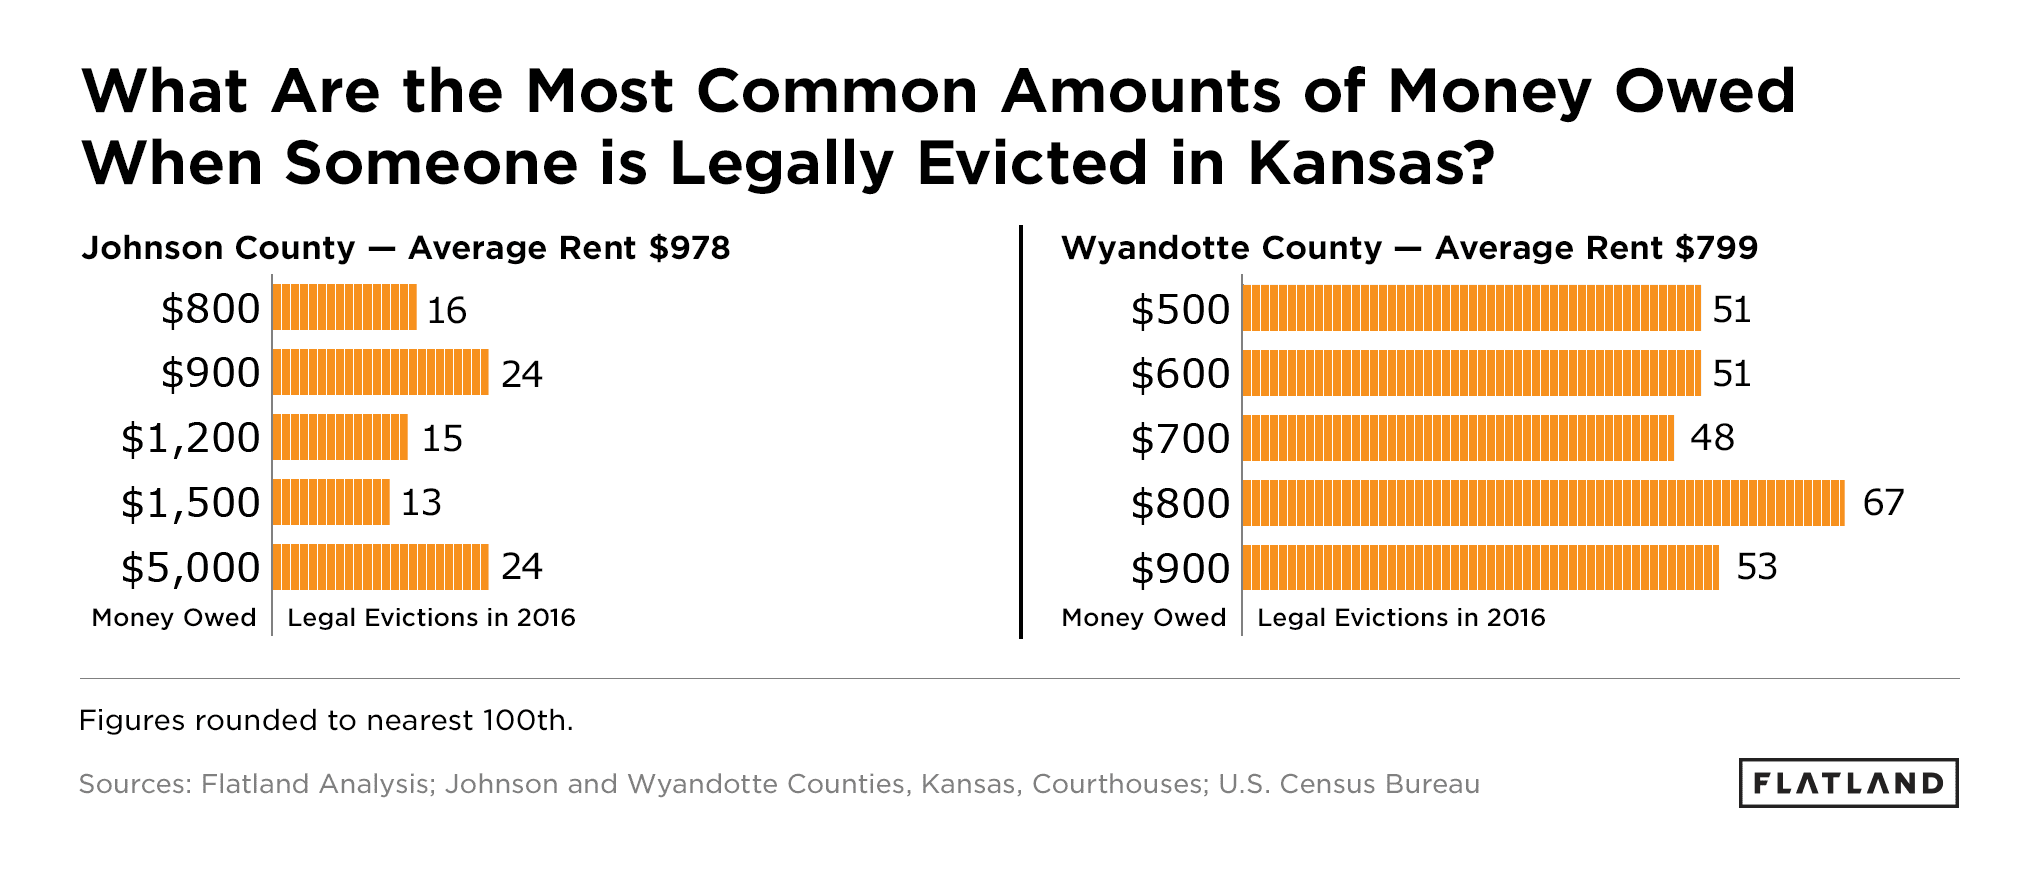 What Are the Most Common Amounts of Money Owed When Someone is Legally Evicted in Kansas?